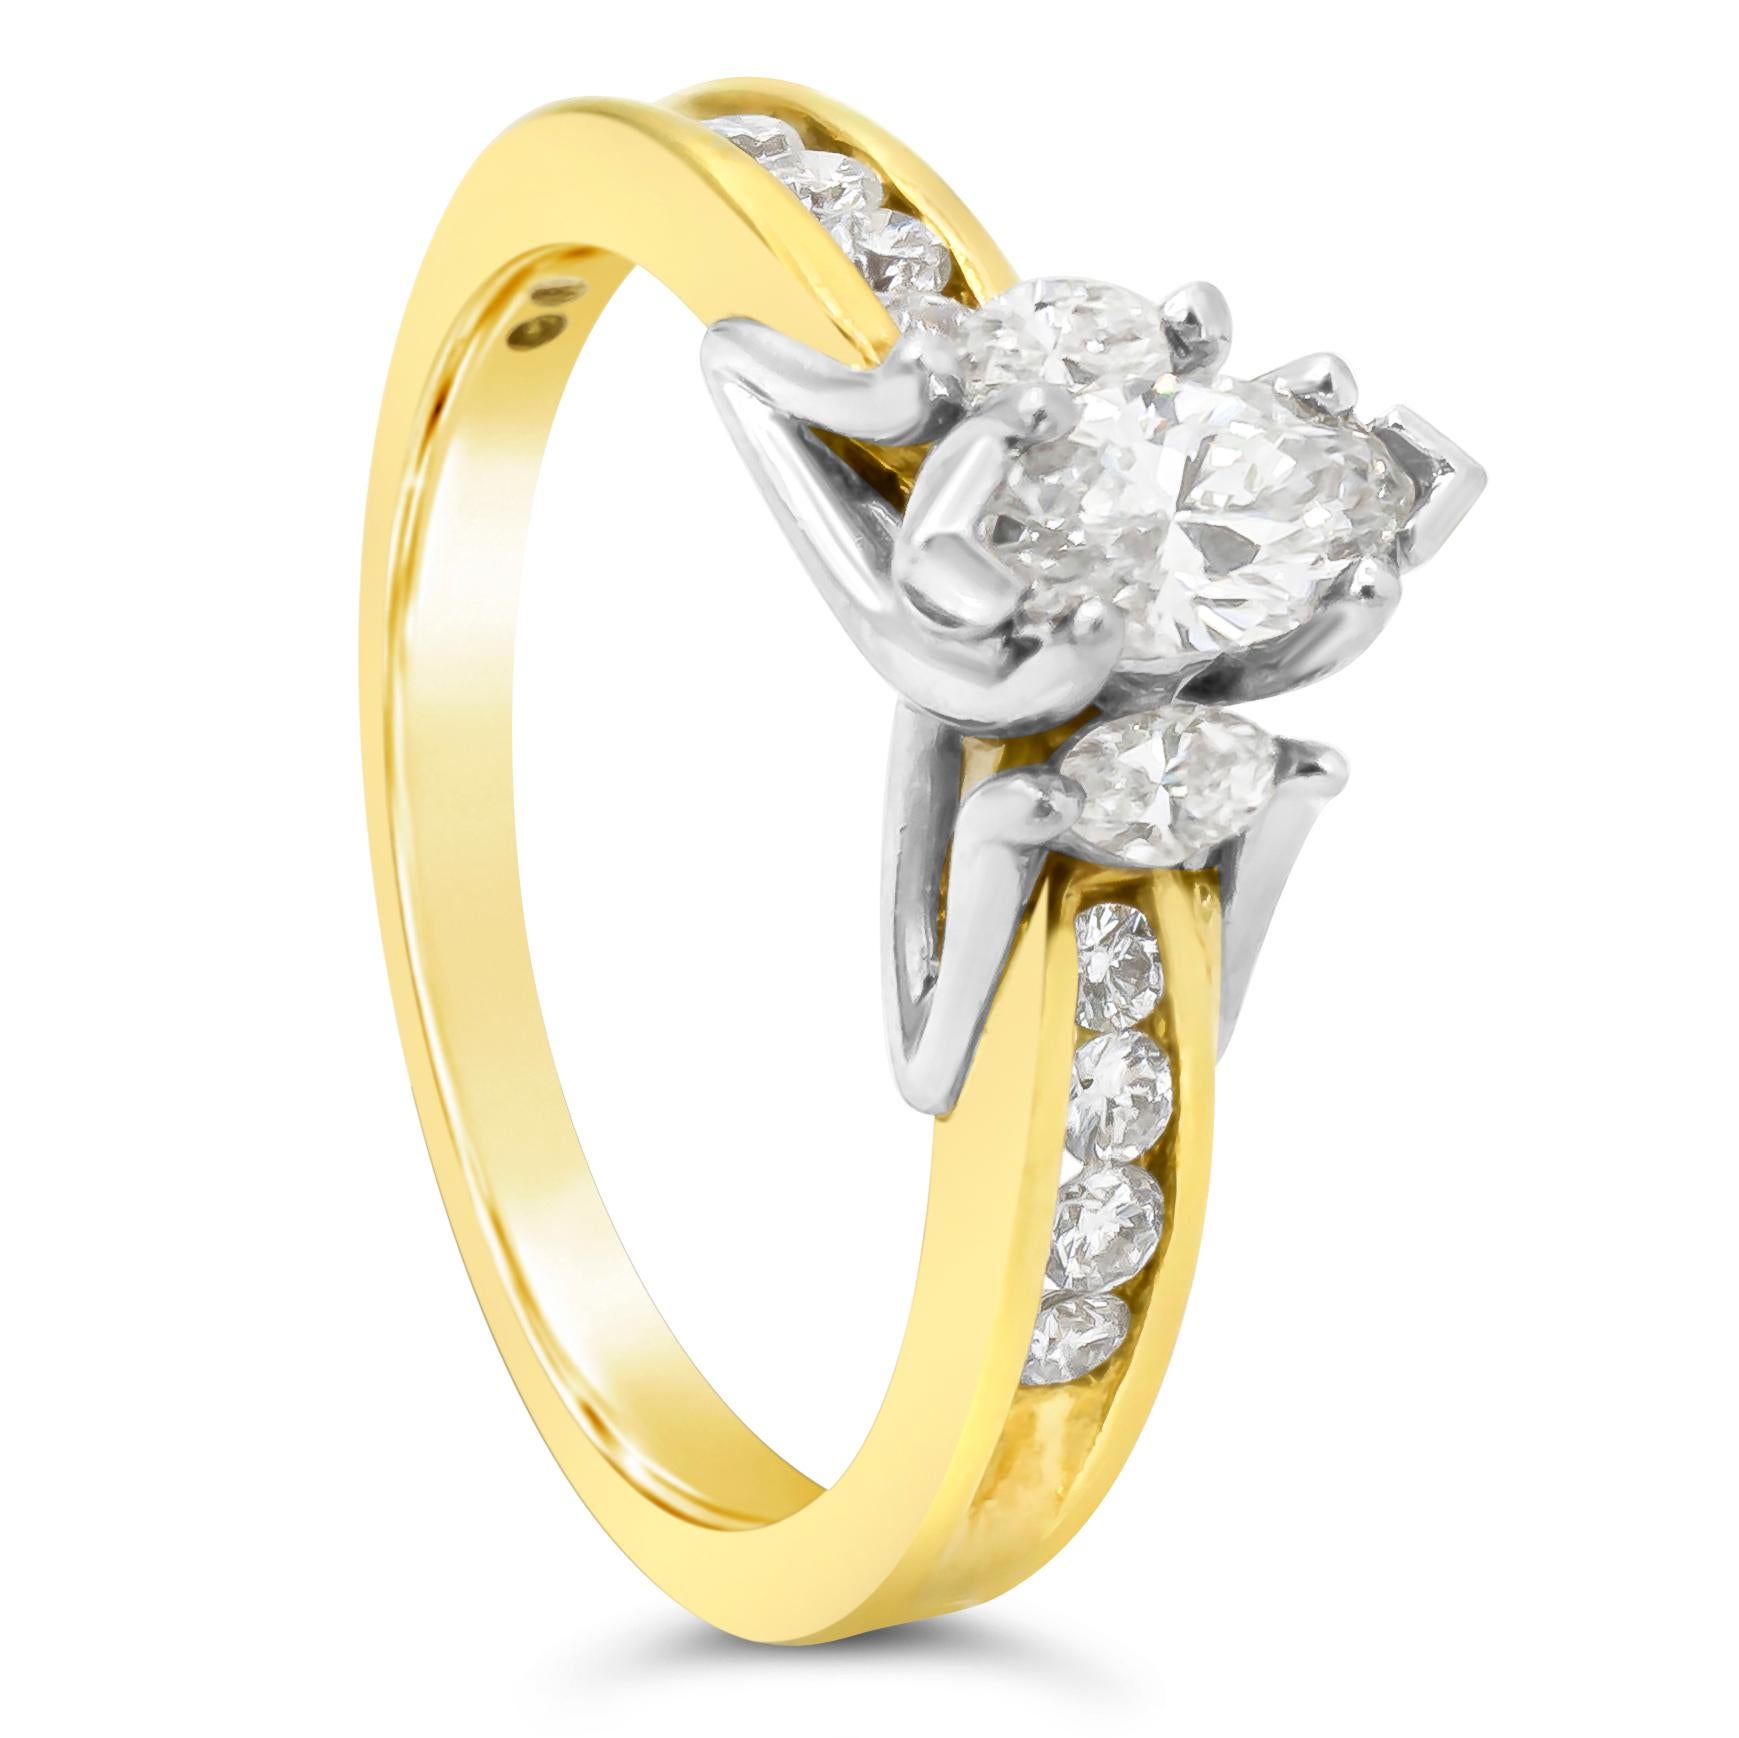 A chic and unique engagement ring, showcasing a 0.32 carat marquise cut diamond center stone set on a classic four prong basket setting. Flanked by two melee marquise cut diamonds and accented by round brilliant melee diamonds that goes half-way